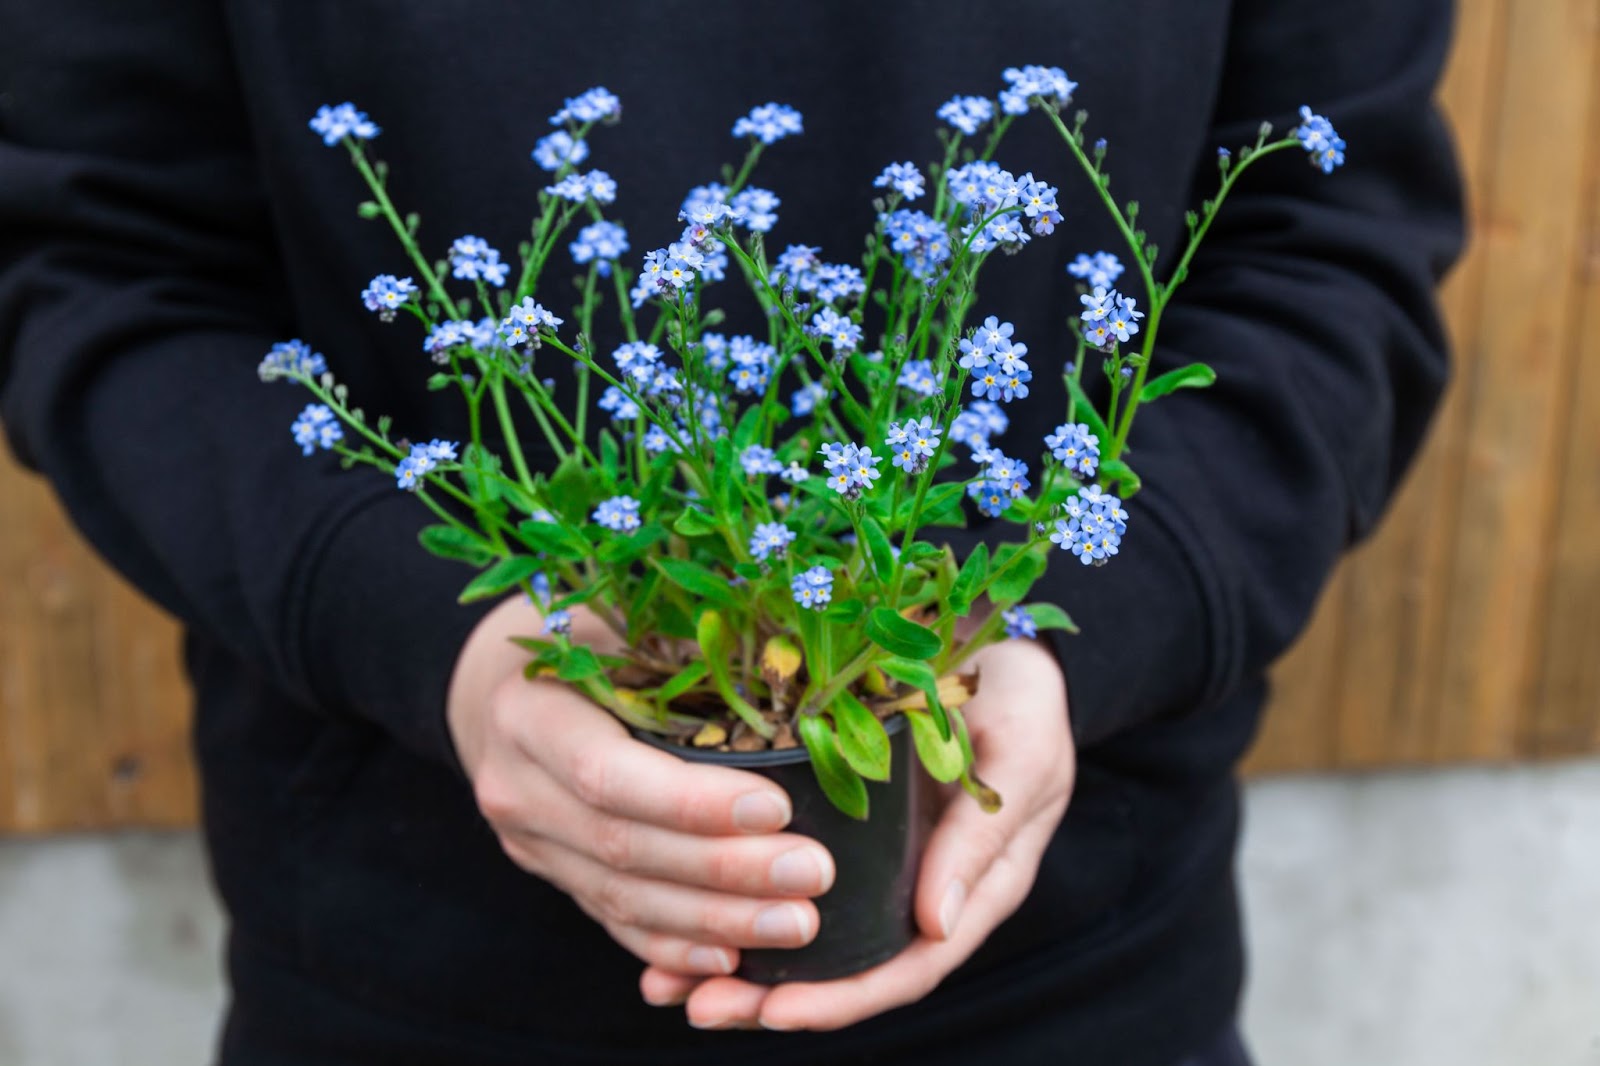 A pot of forget-me-nots held in hands